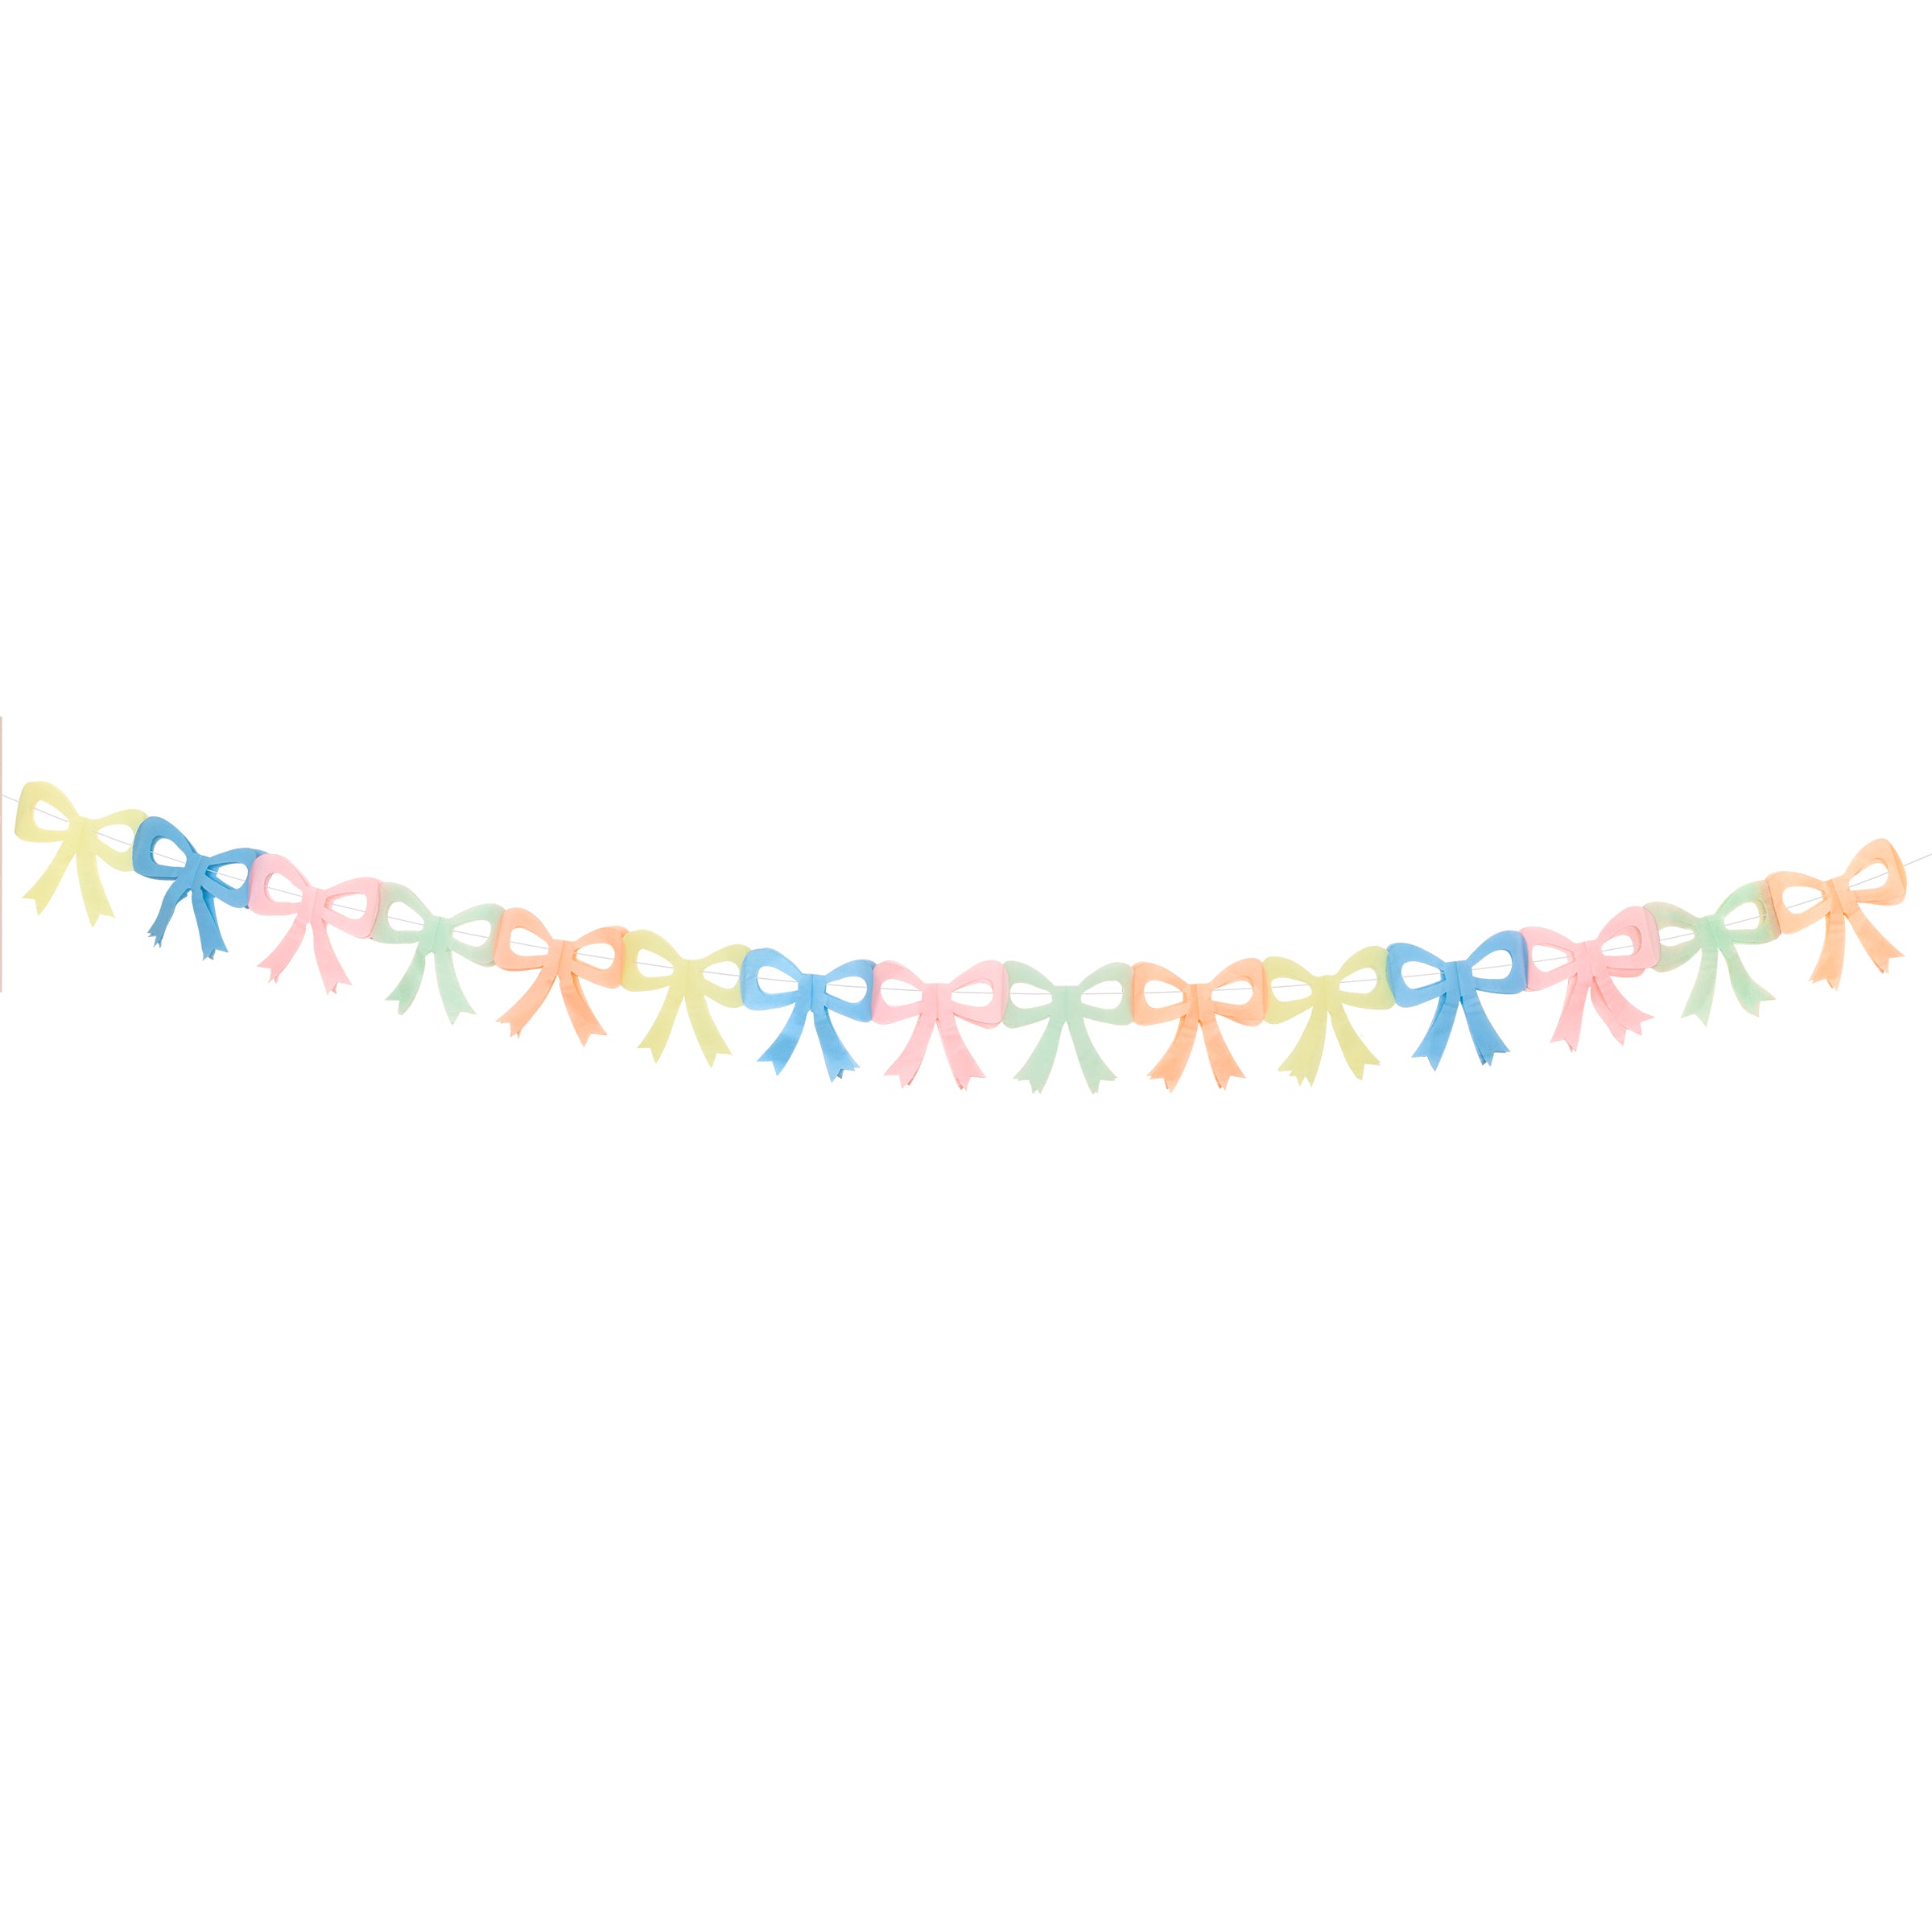 Our pack of 3 party garlands, with colorful bows, is ideal as Easter decorations.